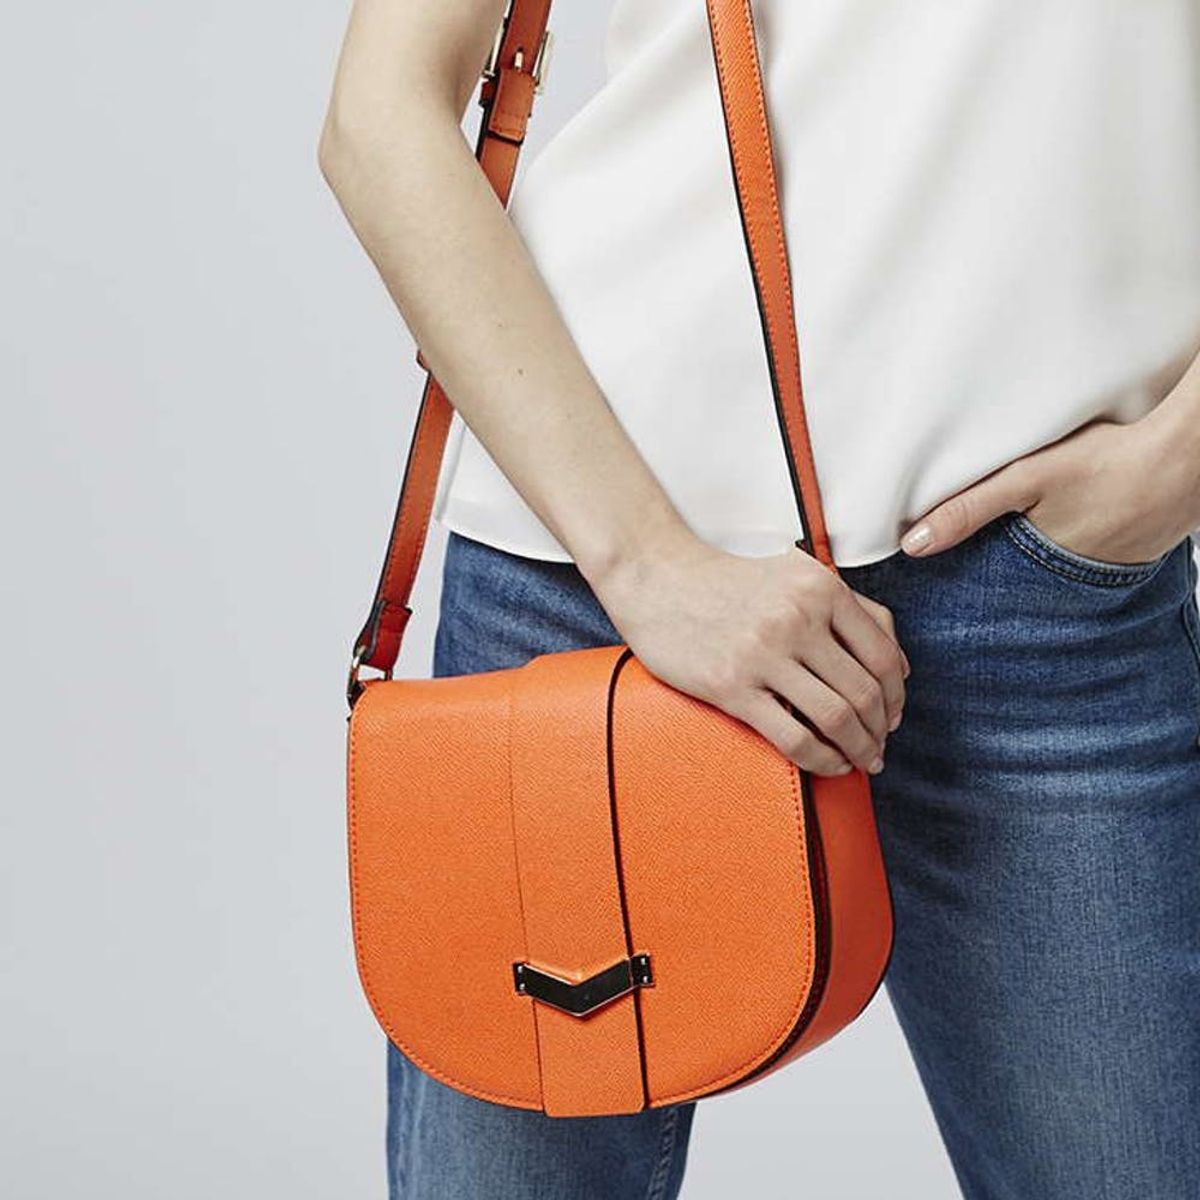 This Is the It Bag Everyone Will Be Wearing This Spring